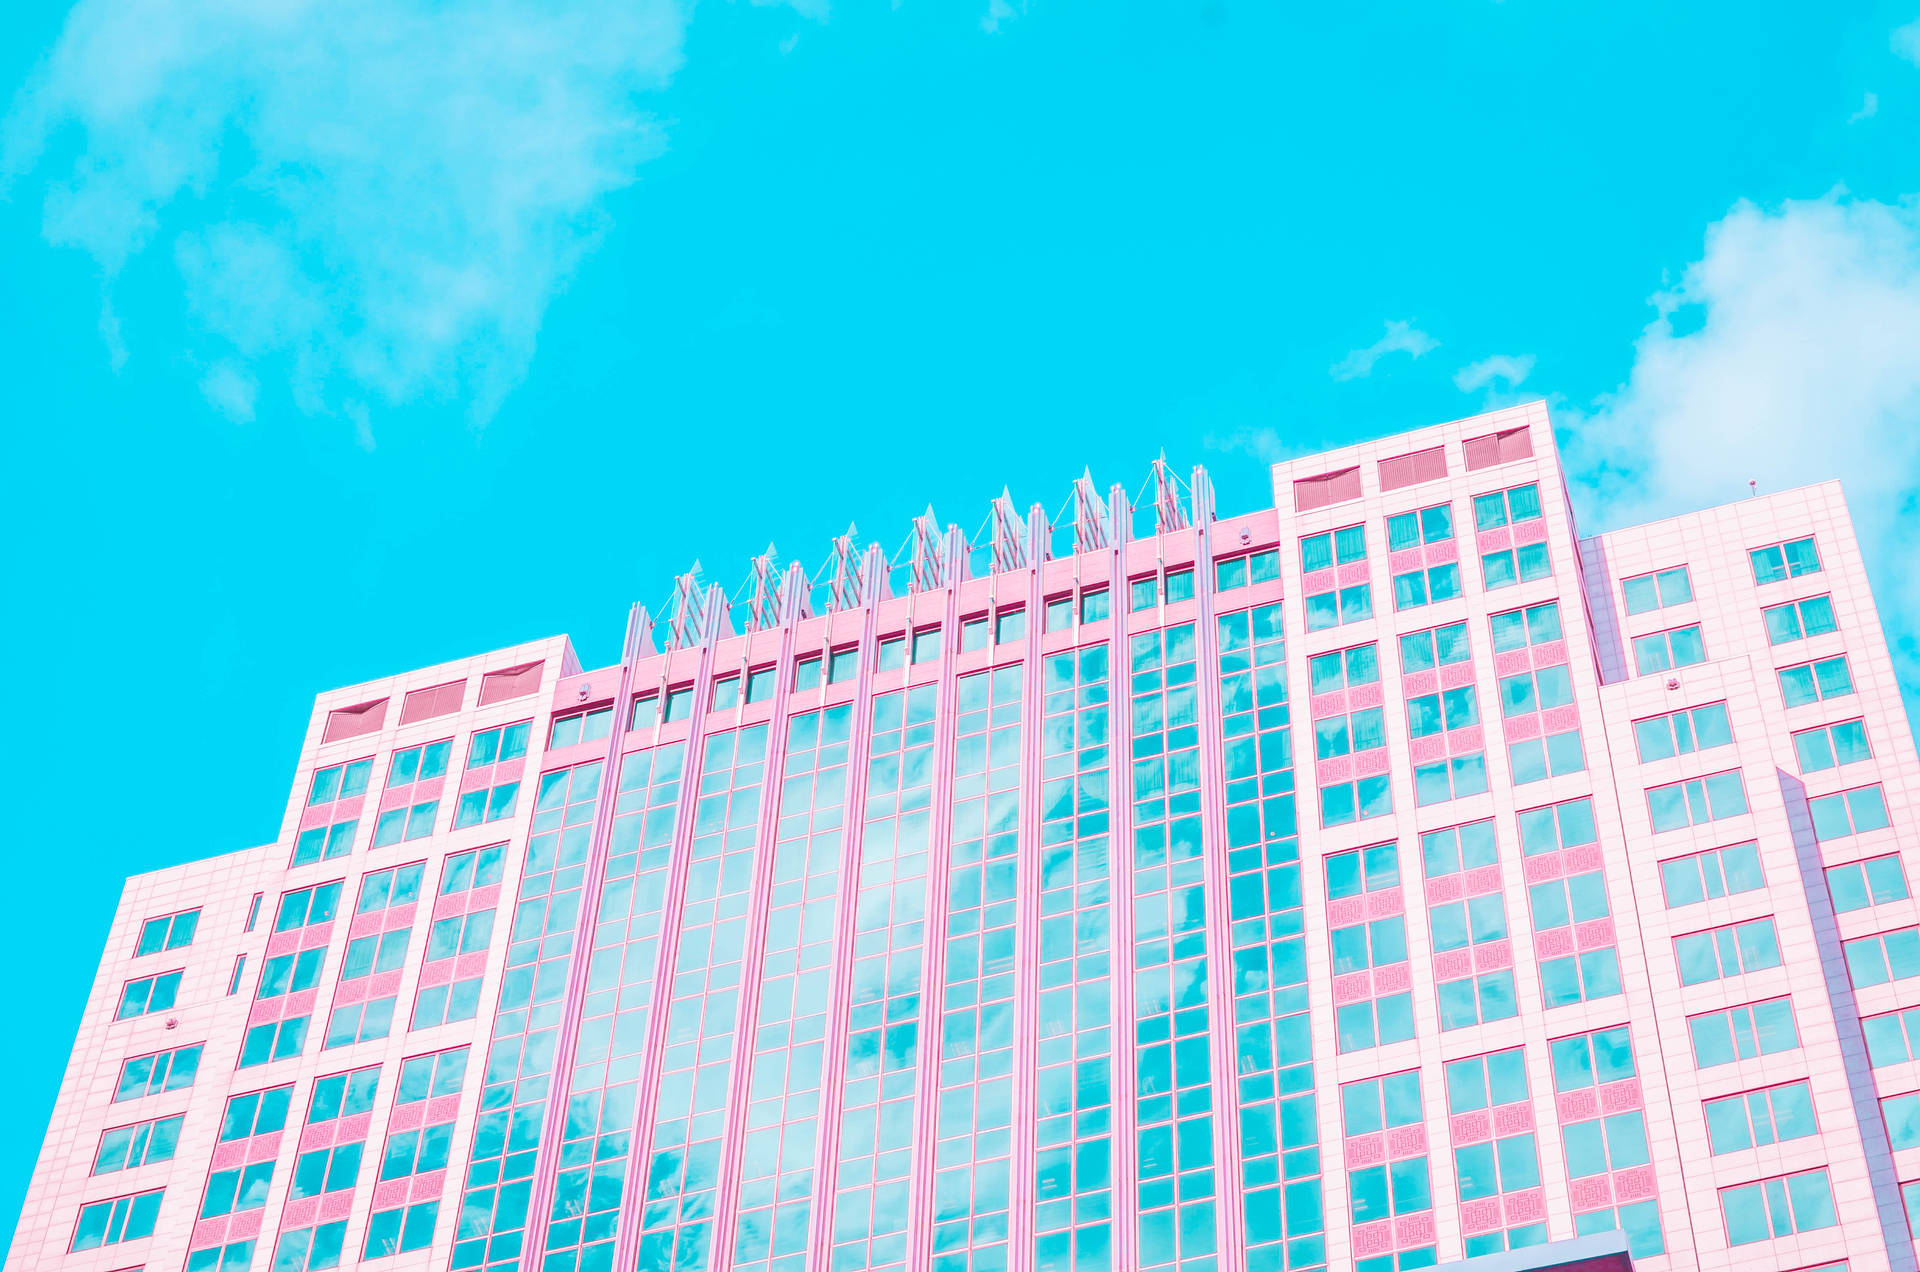 Aesthetic wallpaper of wide pink building with lots of windows reflecting blue sky